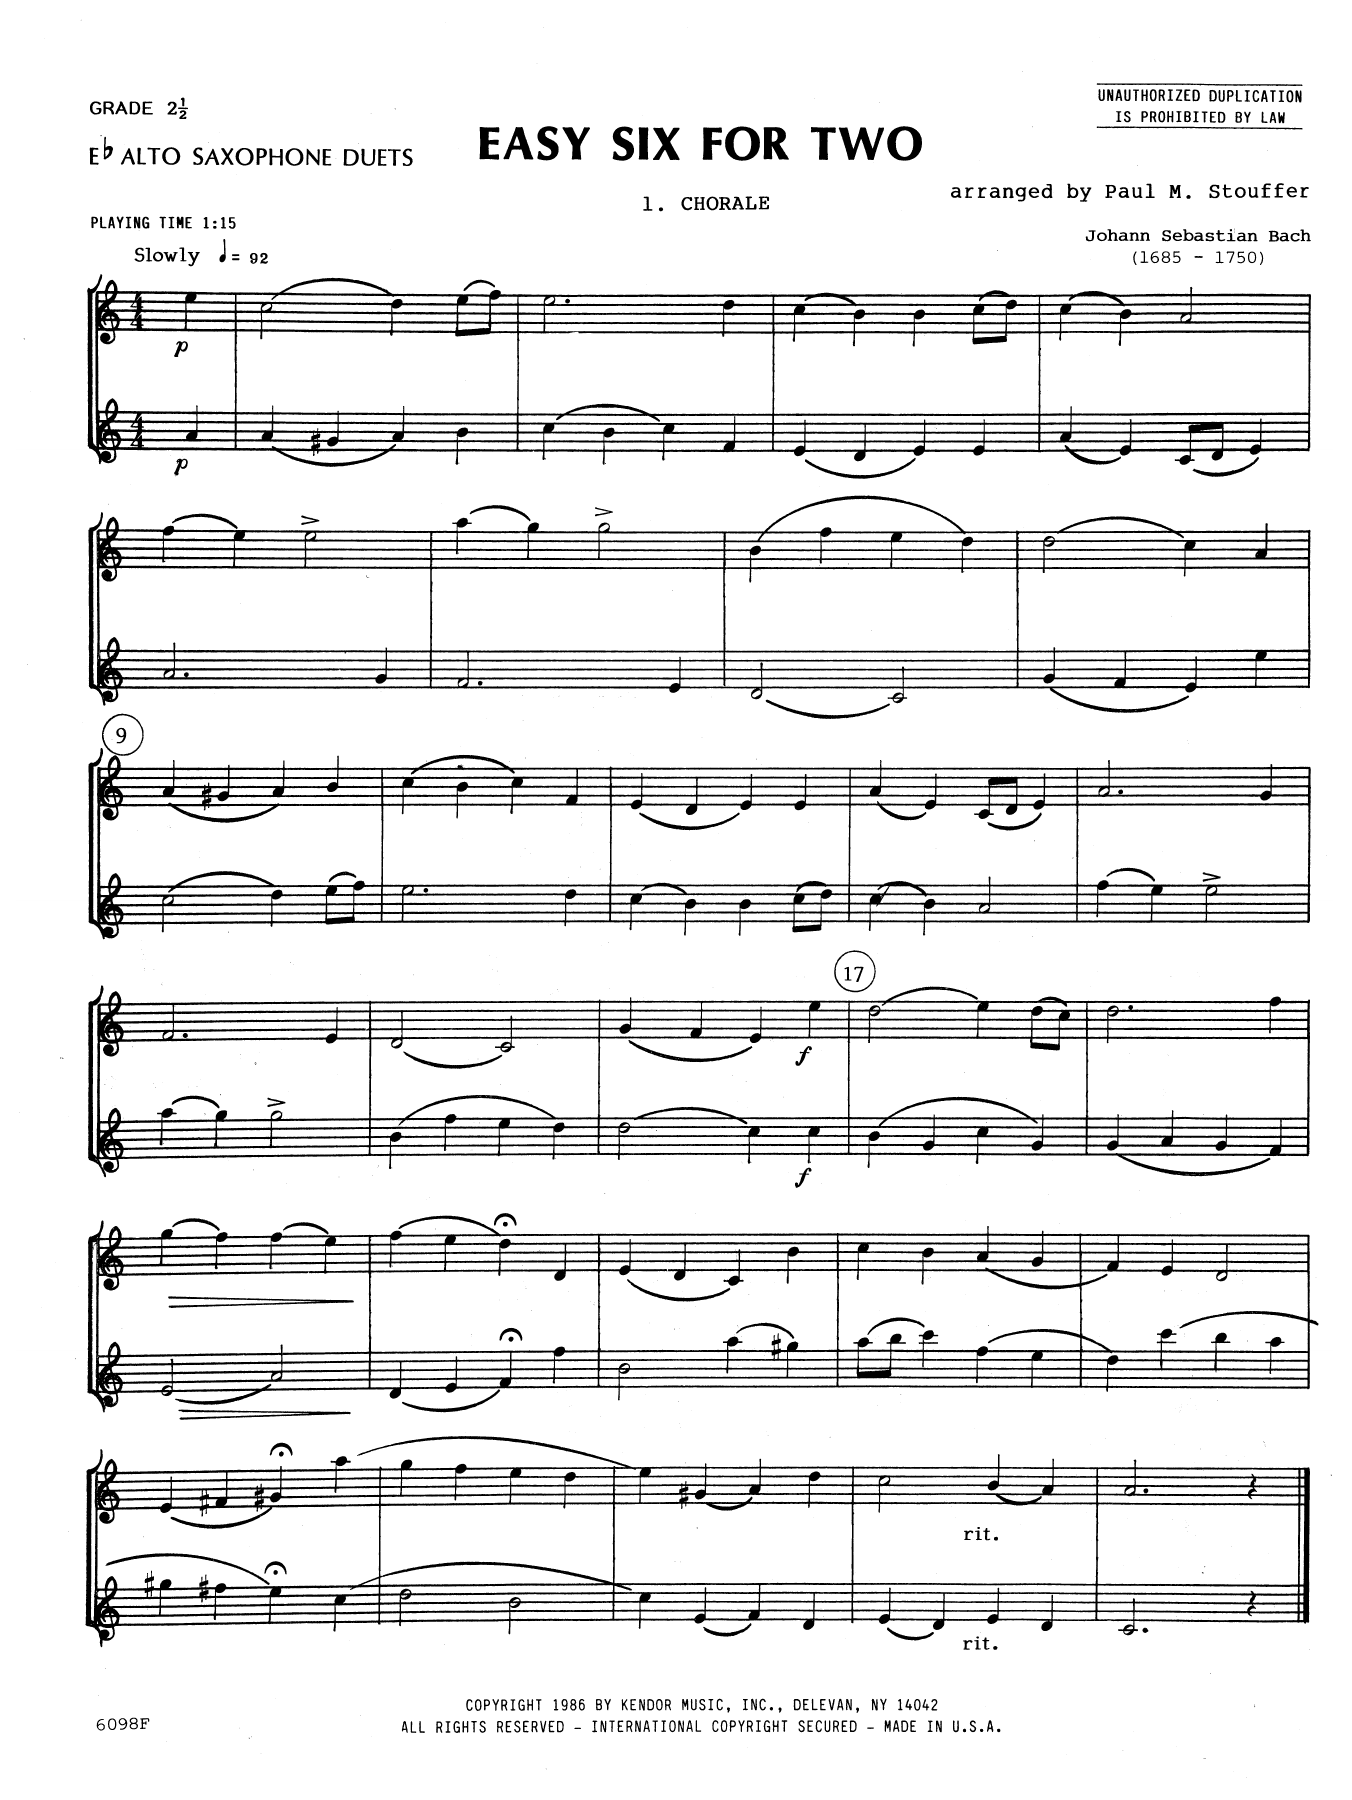 Download Paul M. Stouffer Easy Six For Two Sheet Music